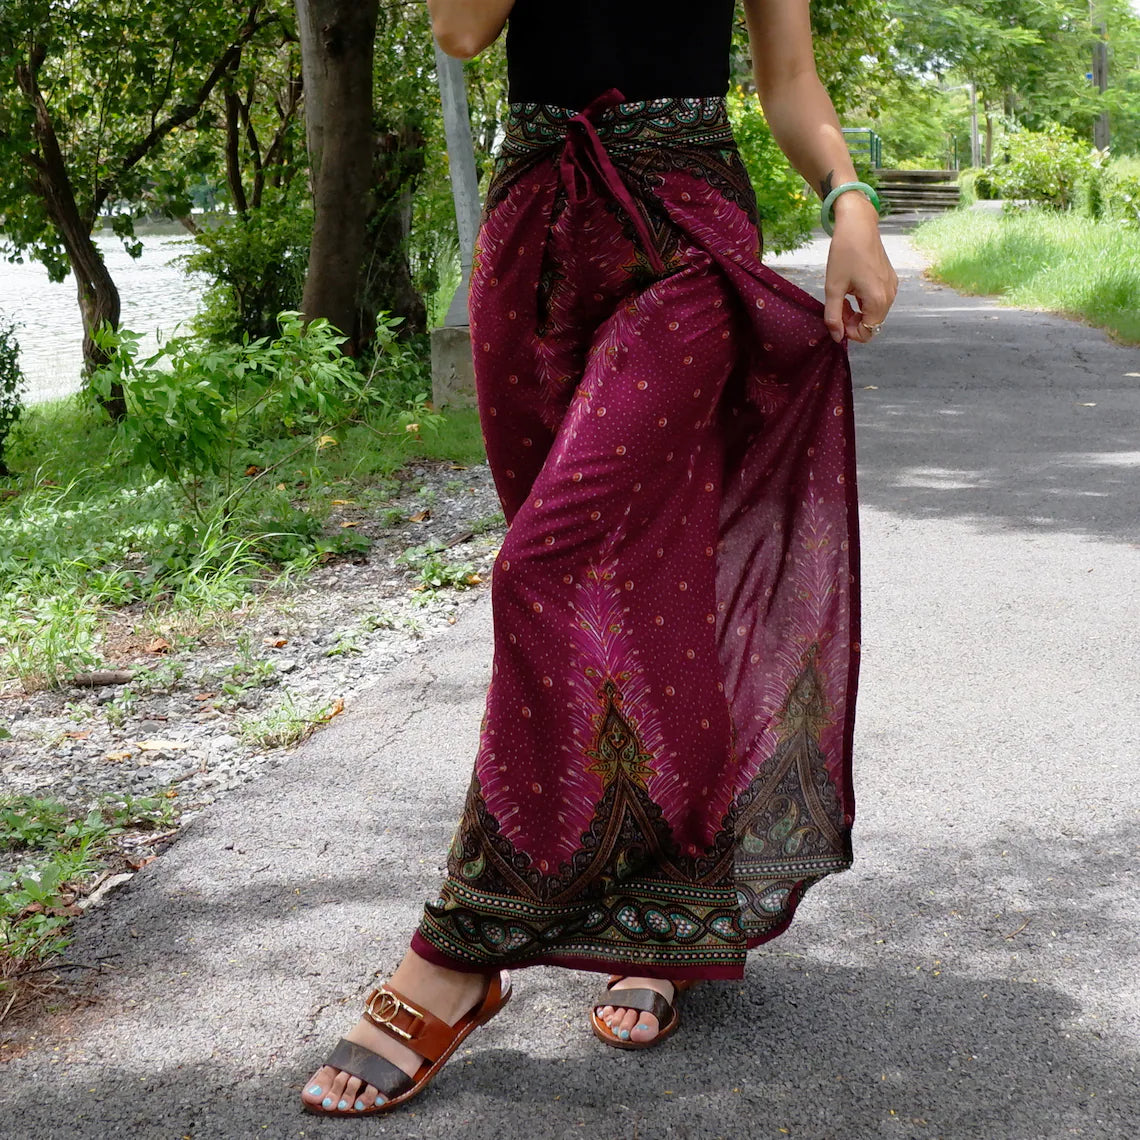 Fashionable red maroon boho feather print wrap pants paired with a chic black top, perfect for outdoor style.